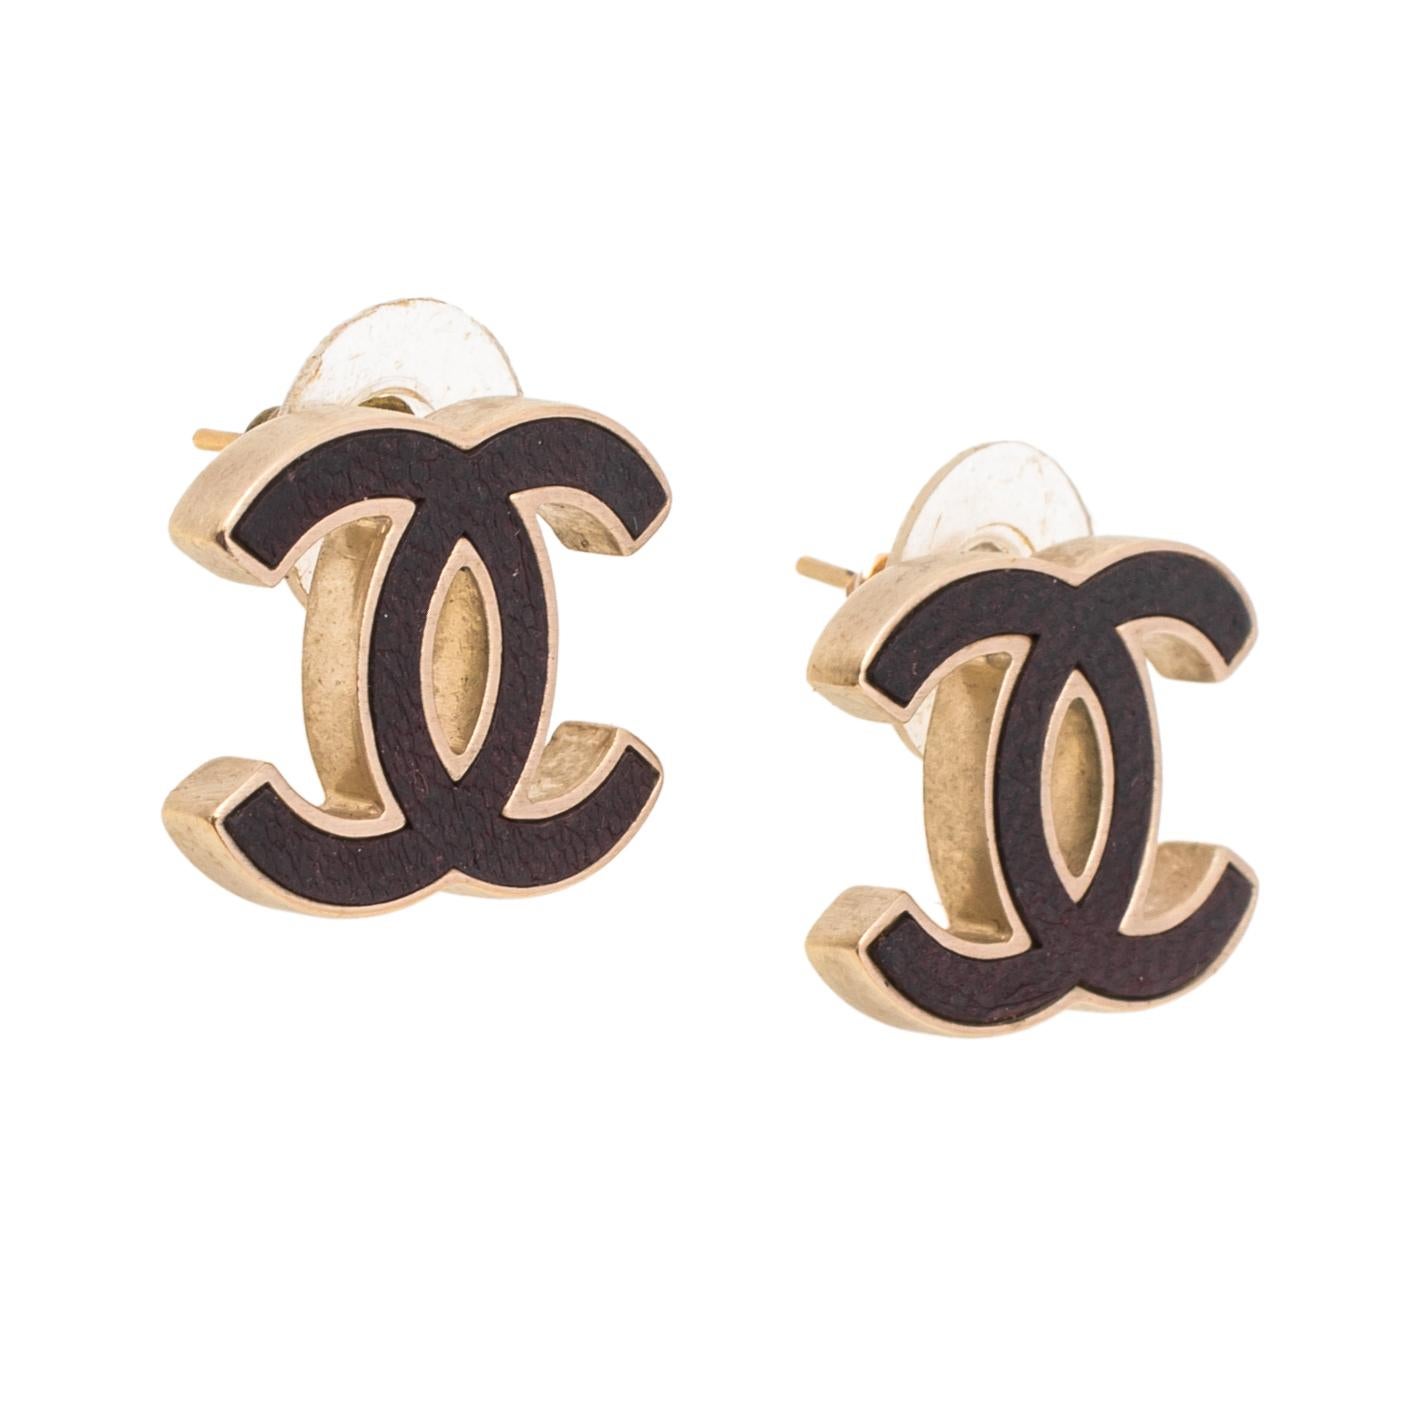 These stud earrings from Chanel are sure to brighten your heart. The earrings are crafted from gold-tone metal in the shape of the iconic CC logo and detailed with leather inlay. They come equipped with pushbacks. They can be worn for everyday